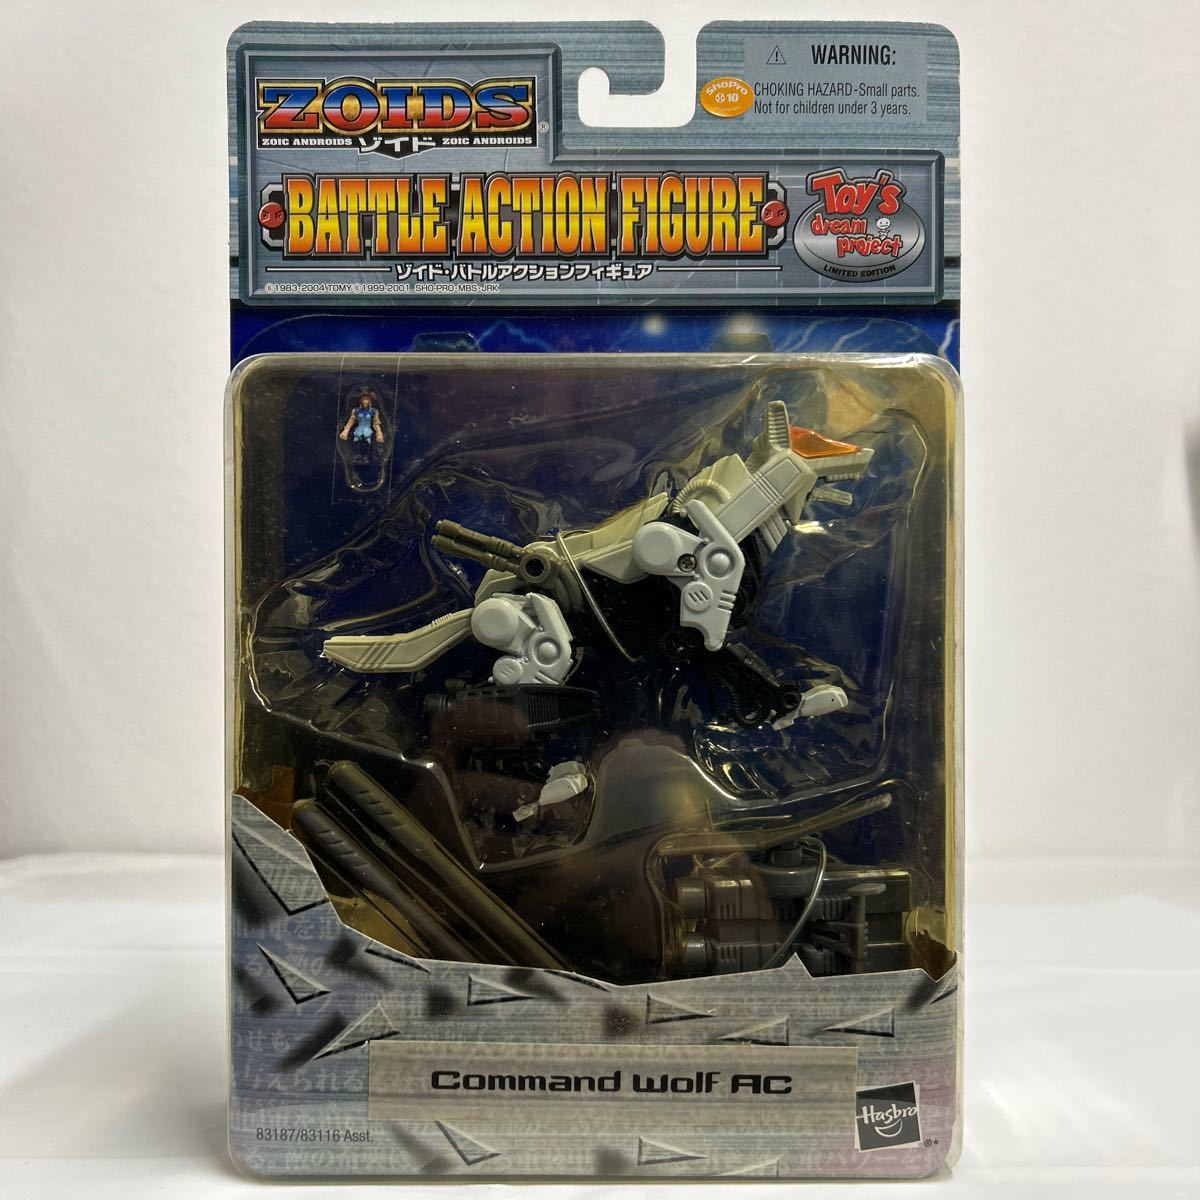 Hasbro ZOIDS #03 Command Wolf AC is zbro Zoids commando Wolf Battle action figure that time thing toys Dream limitation old 